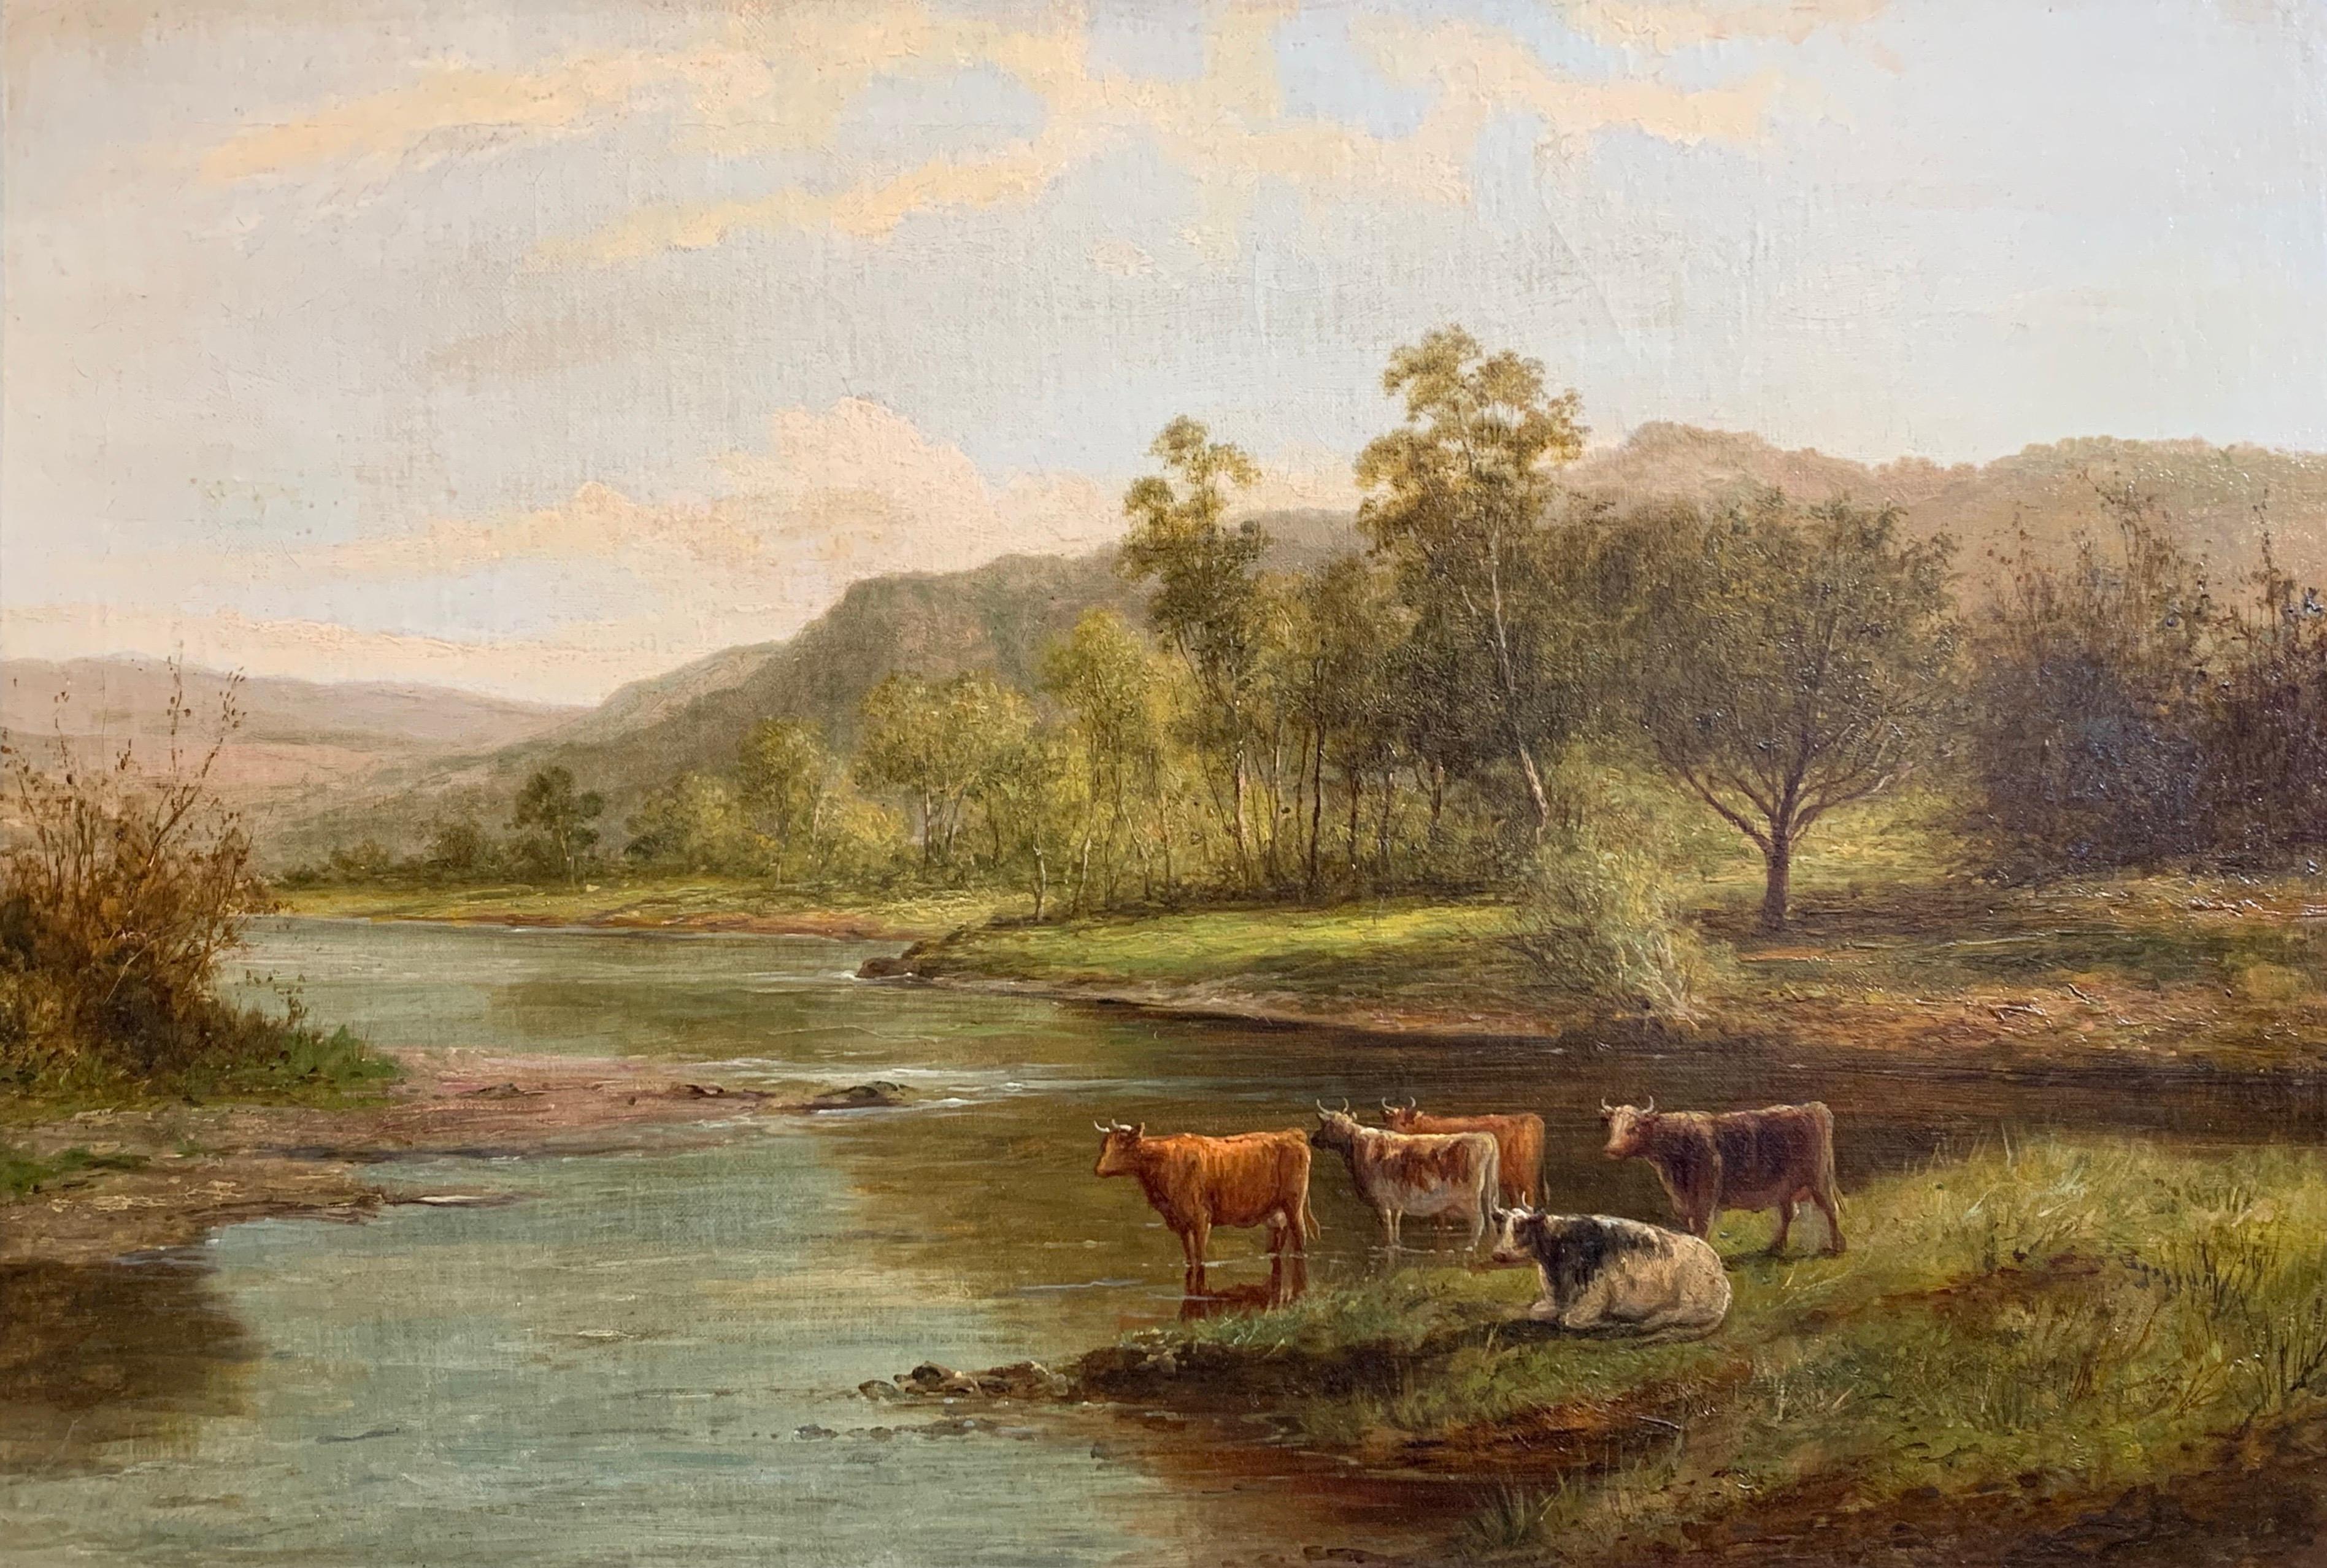 J. Marshall Animal Painting - Victorian Signed Oil Painting Cattle Watering River English Landscape Framed